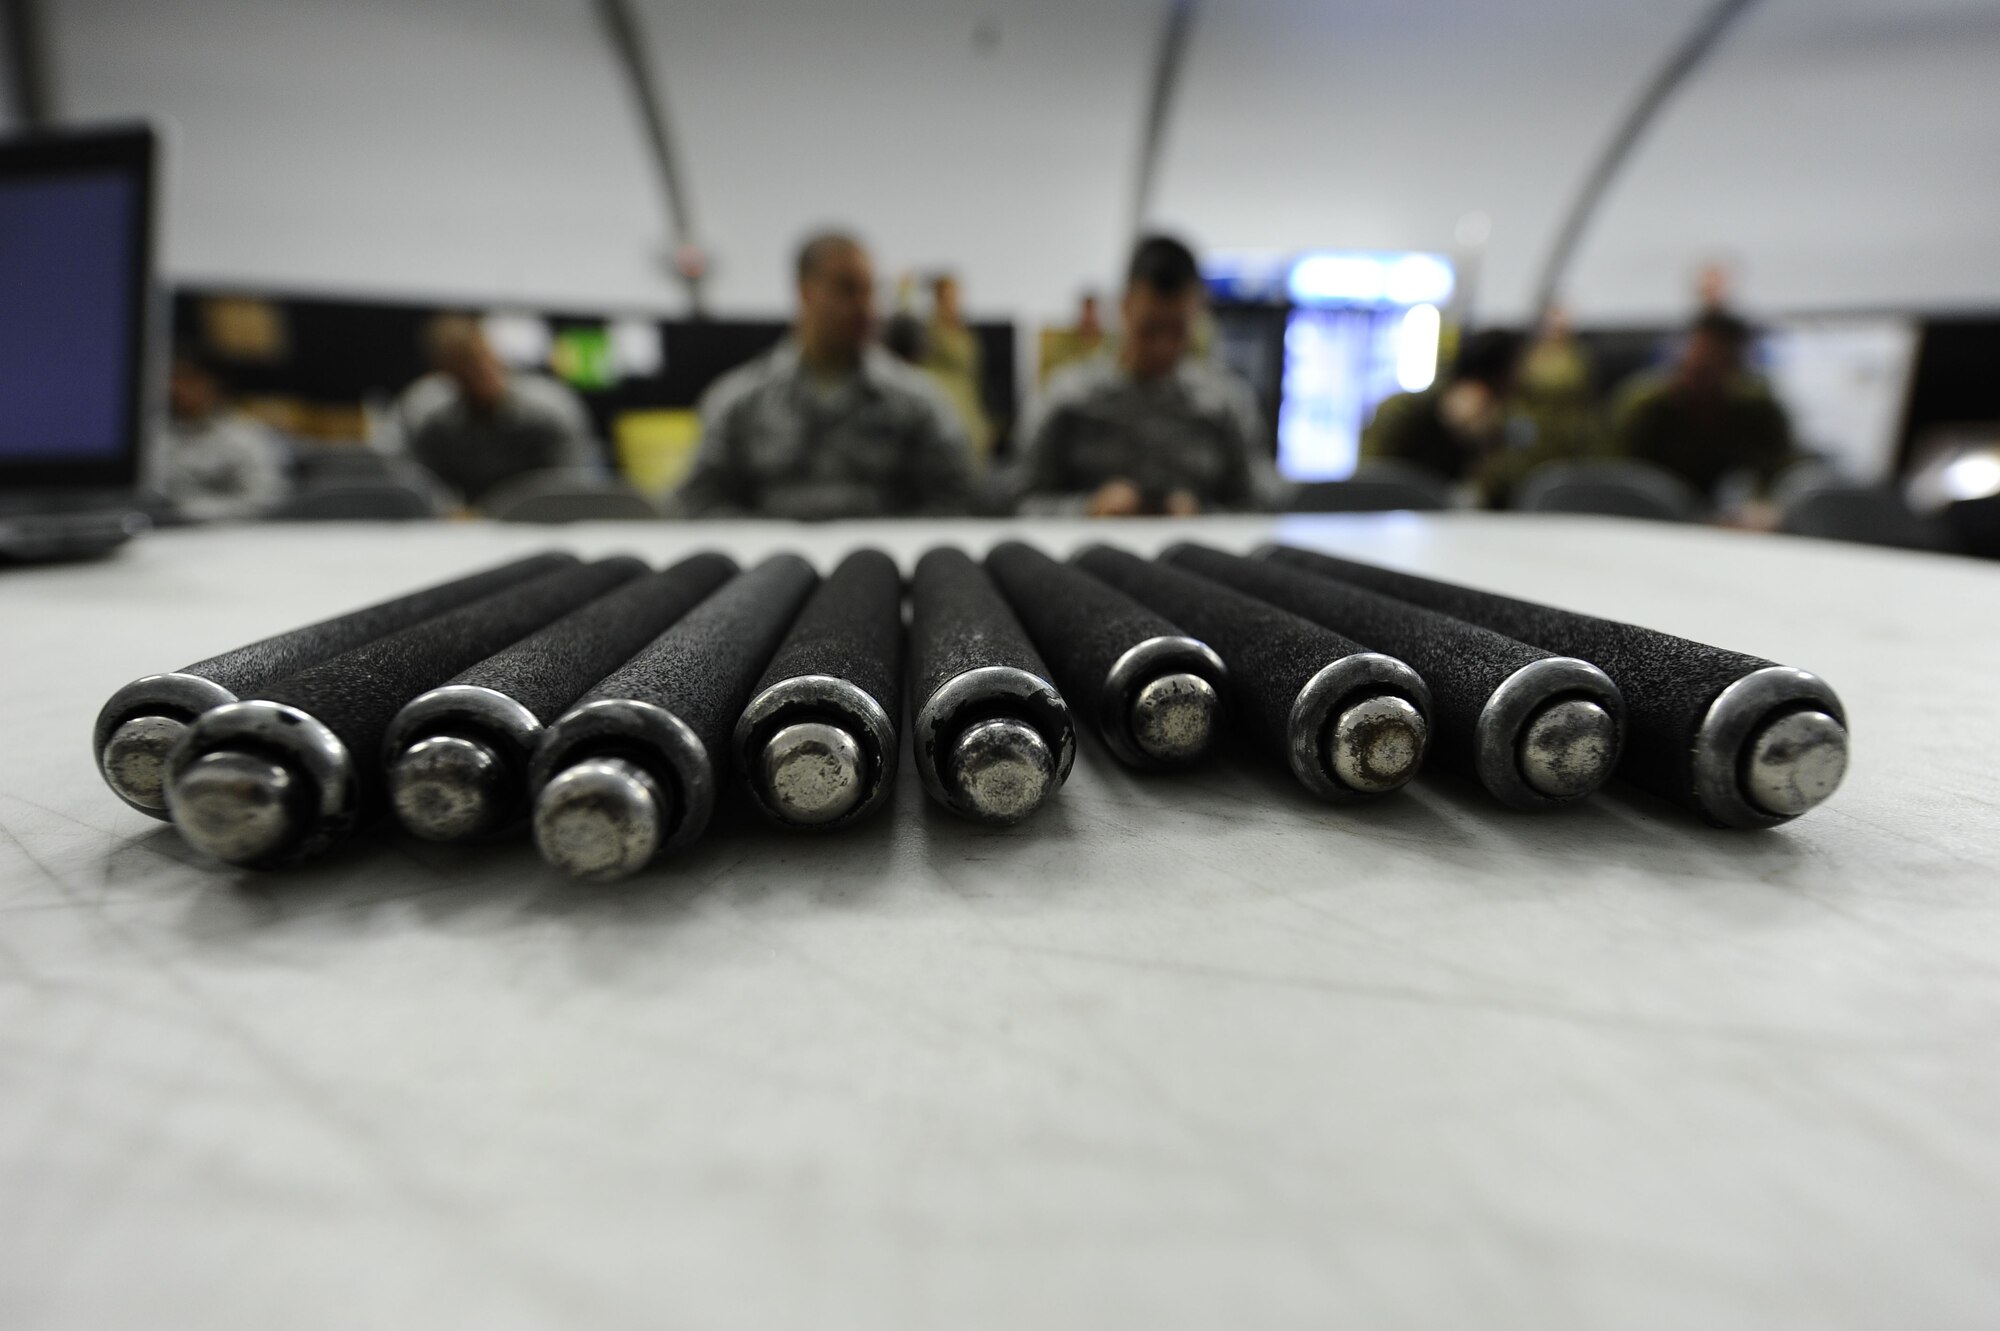 Members of the 380th Expeditionary Security Forces Squadron at Al Dhafra Air Base, United Arab Emirates sit in ASP Baton training class Dec. 1, 2017. Security Forces members protect and secure military installations as well as the personnel, equipment and resources on the installation. 
 (U.S. Air Force photo by Tech. Sgt. Anthony Nelson Jr.)